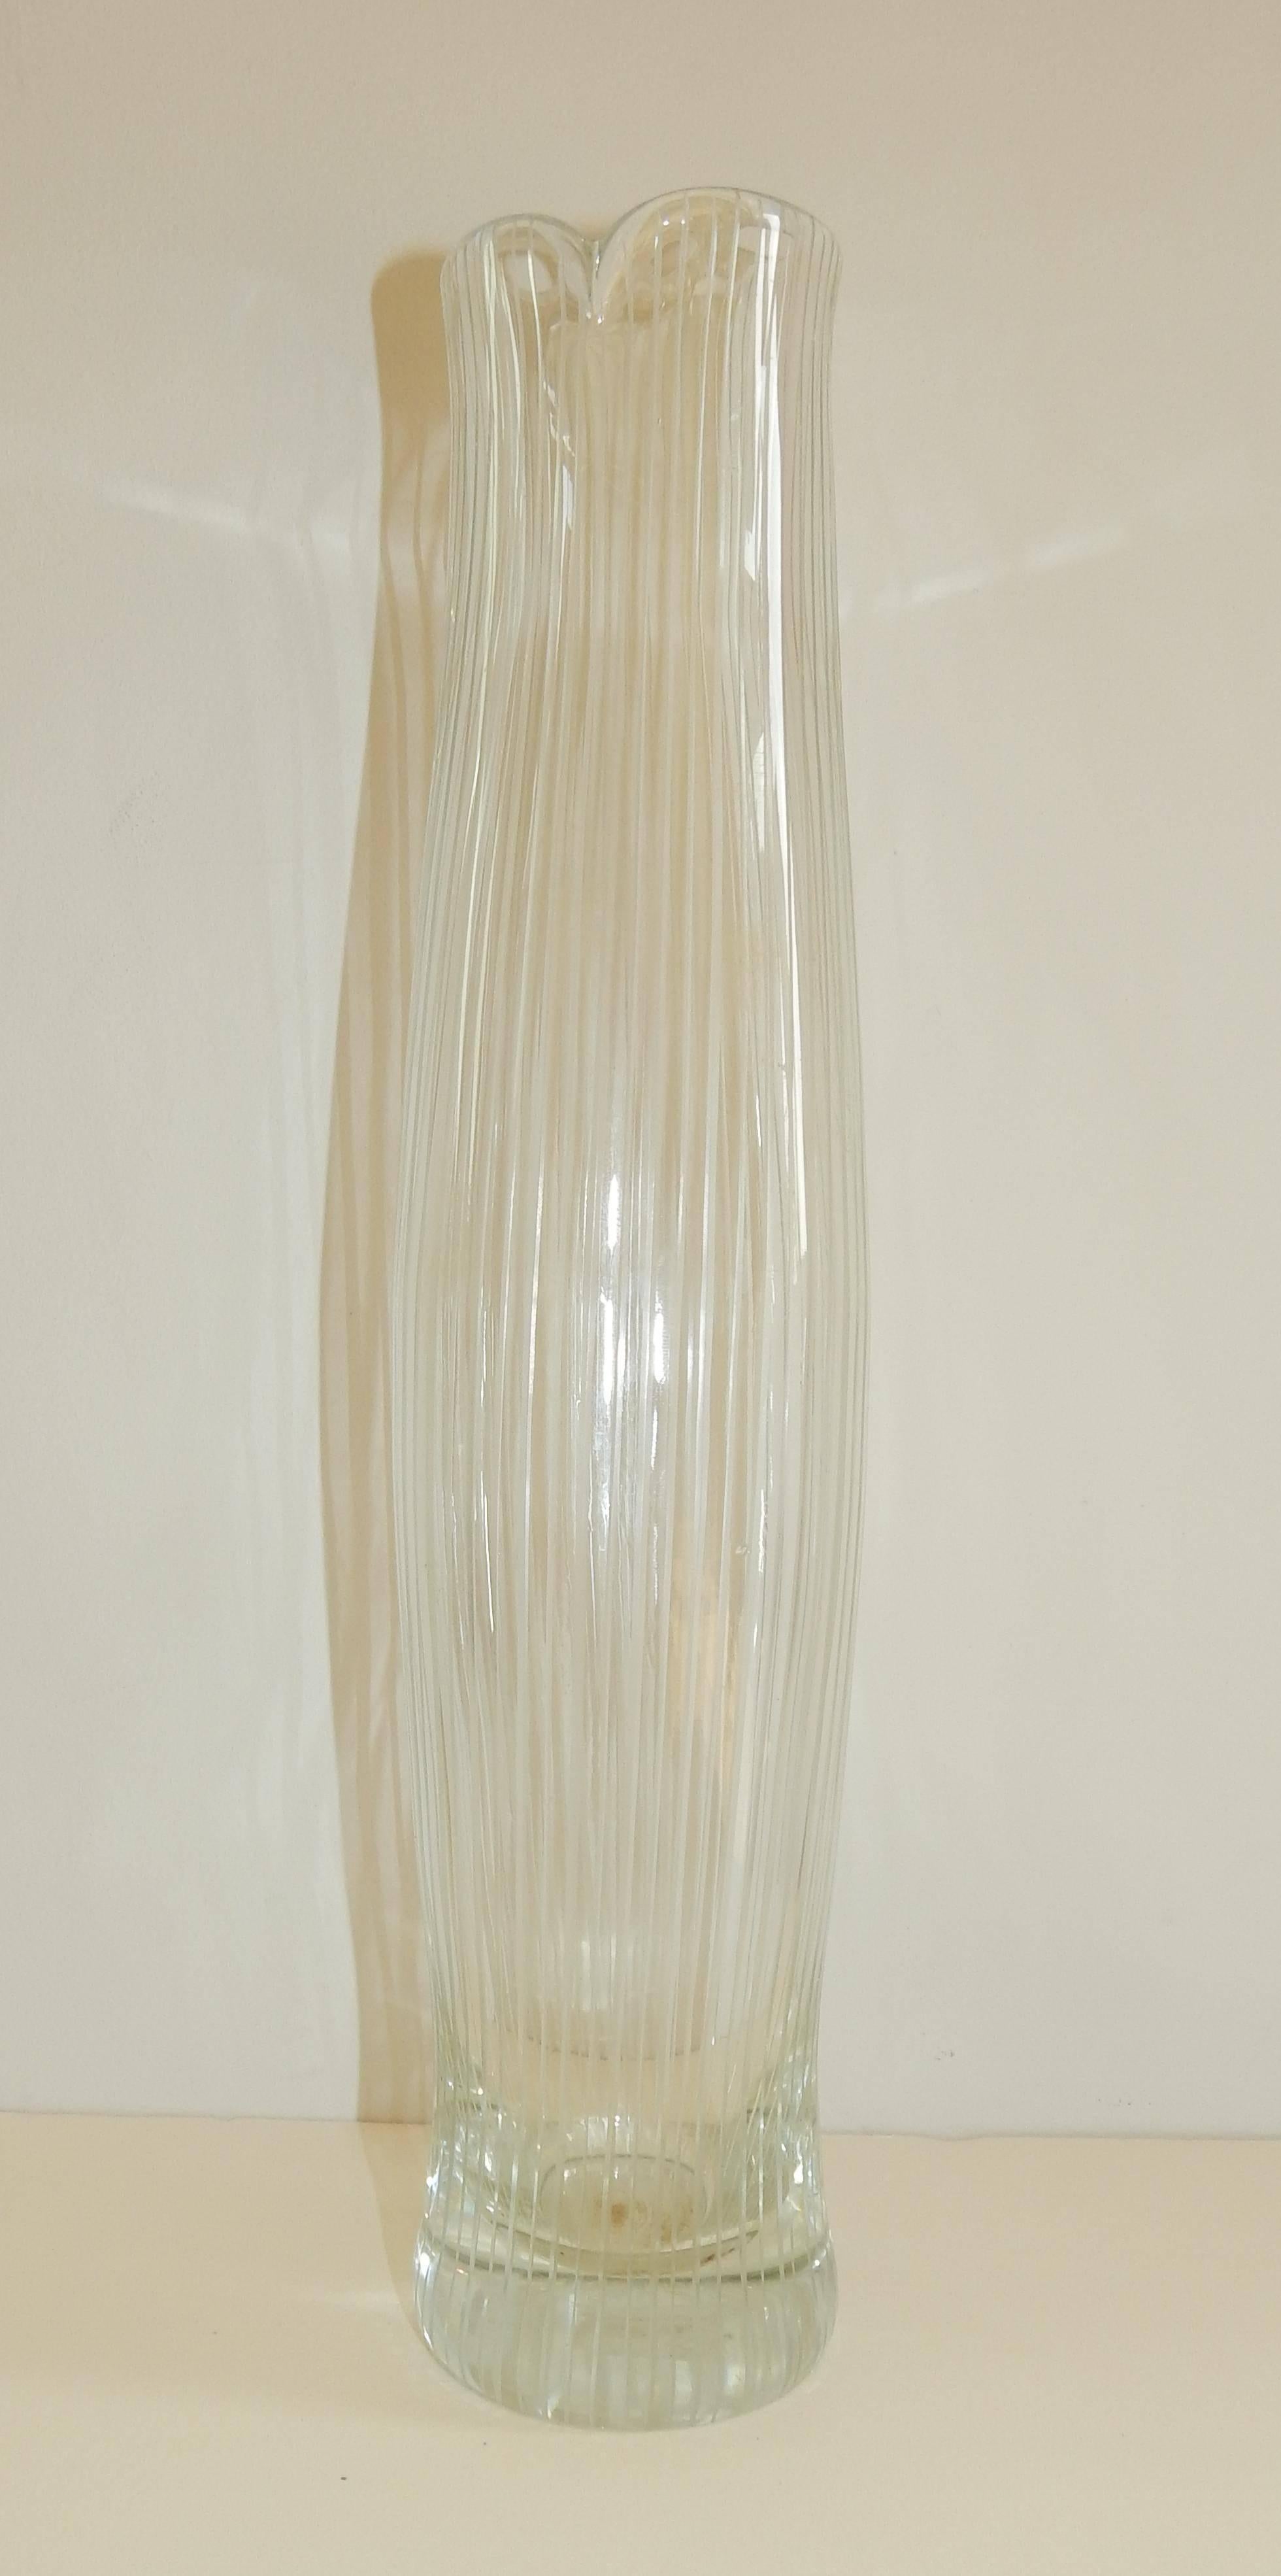 Line cut and turn-mould blown crystal.
Iittala, Finland, measures: 14